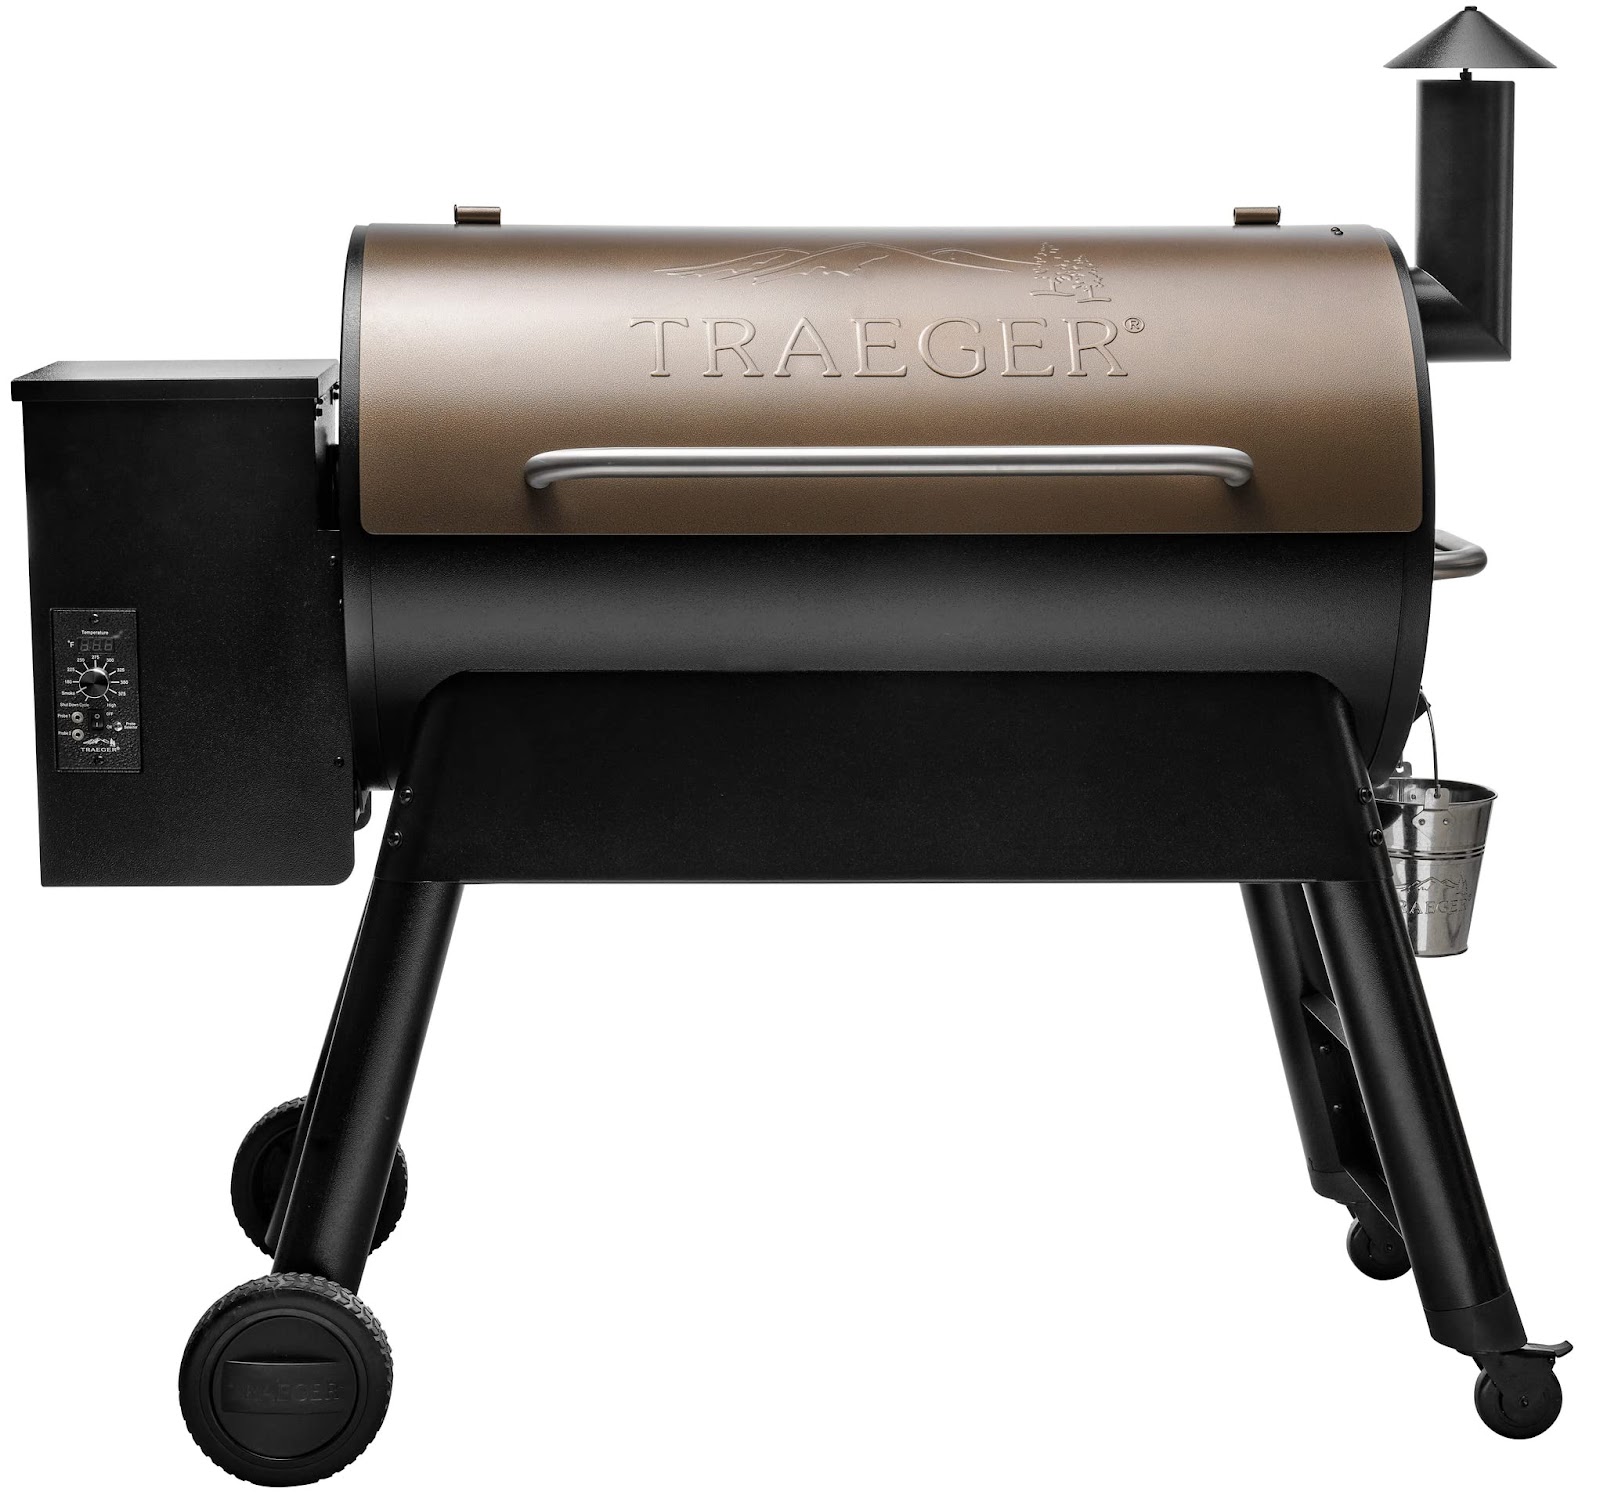 Traeger Pro Series 34 Electric Wood Pellet Grill and Smoker